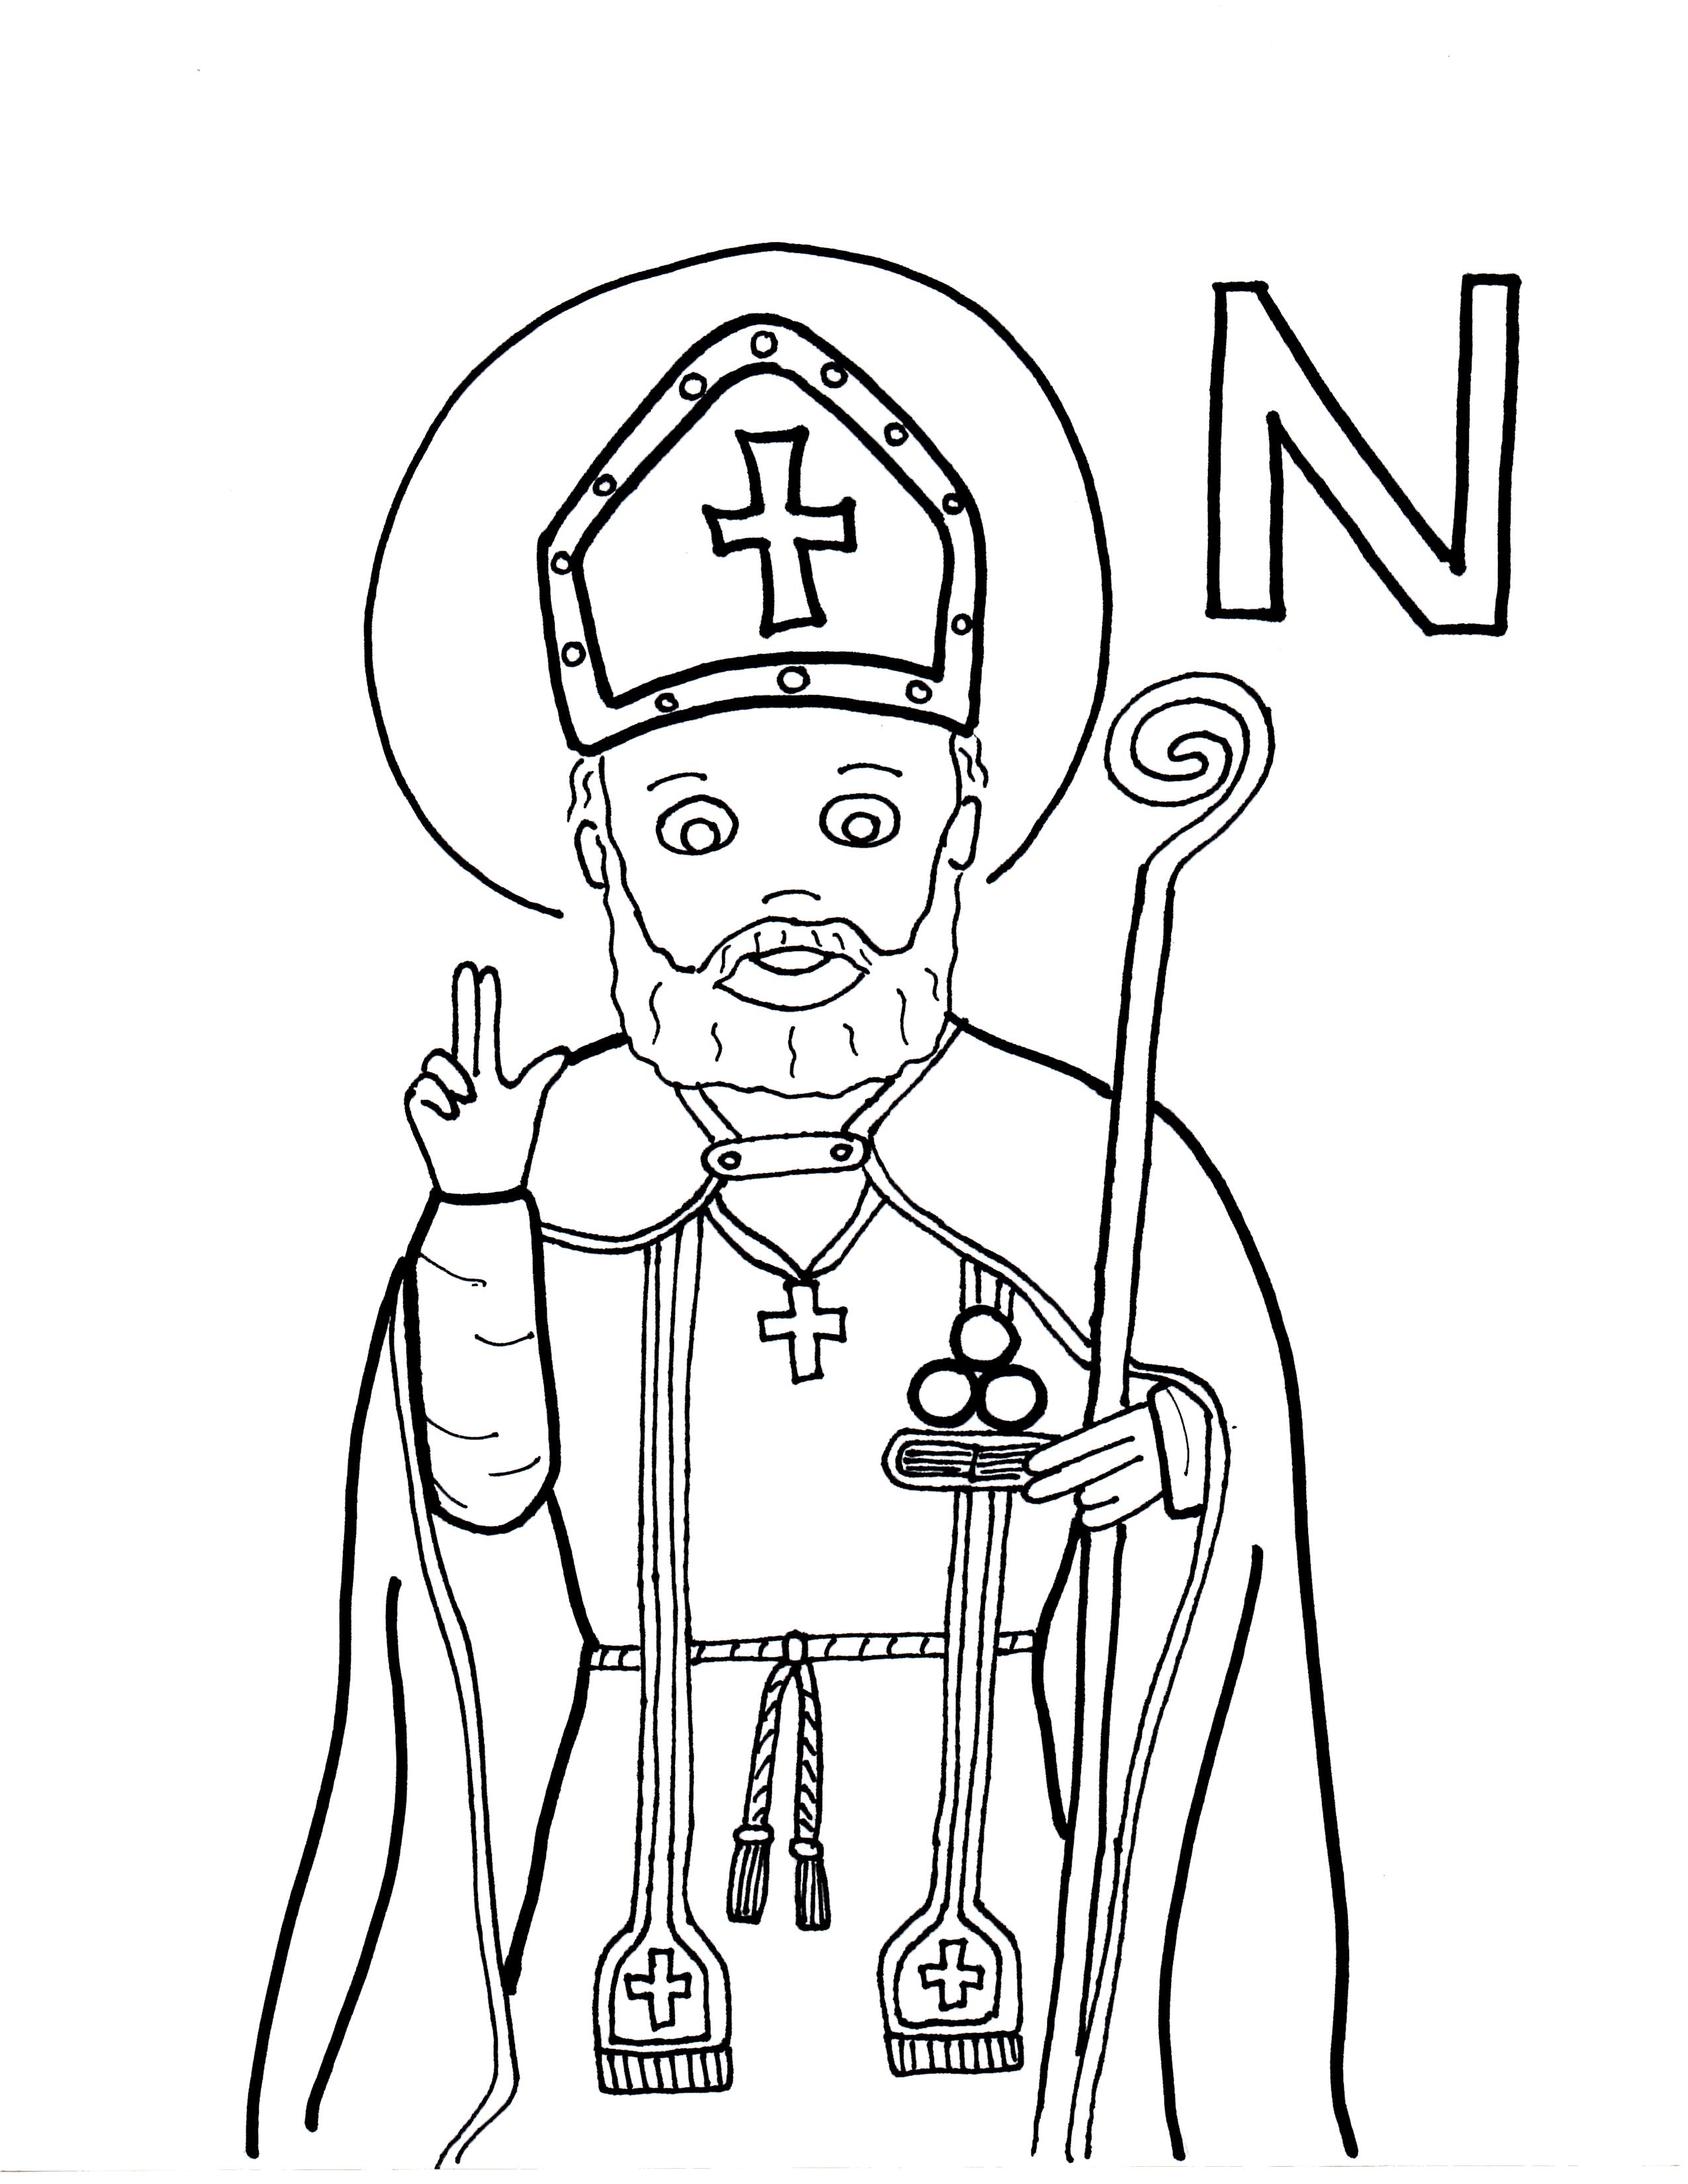 St Nicholas Coloring Page | Free Coloring Pages on Masivy World